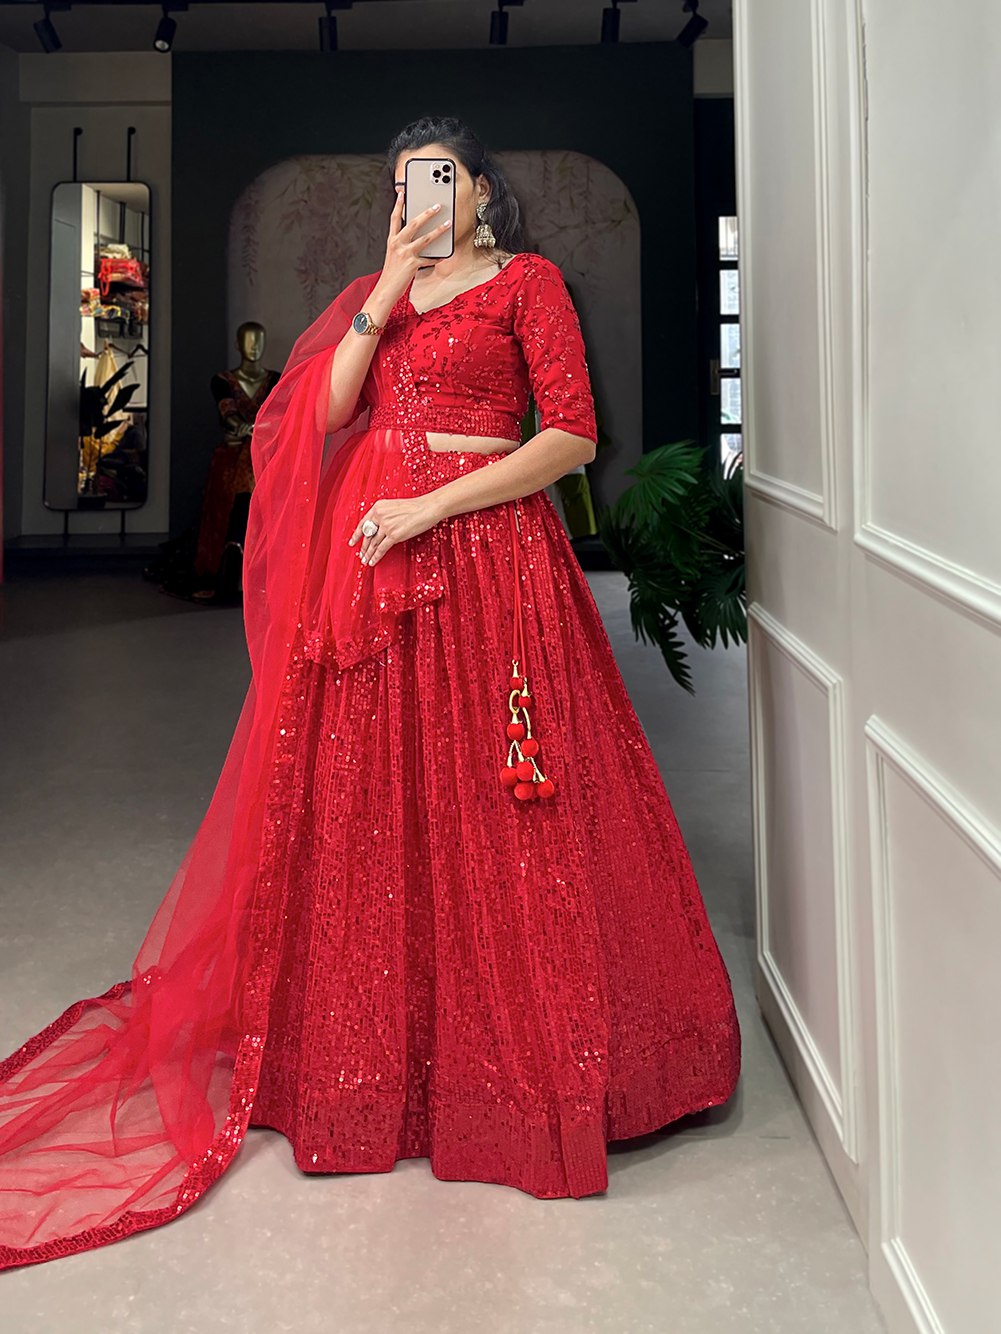 Gownlink Christian Wedding Gowns & Accessories Online in India